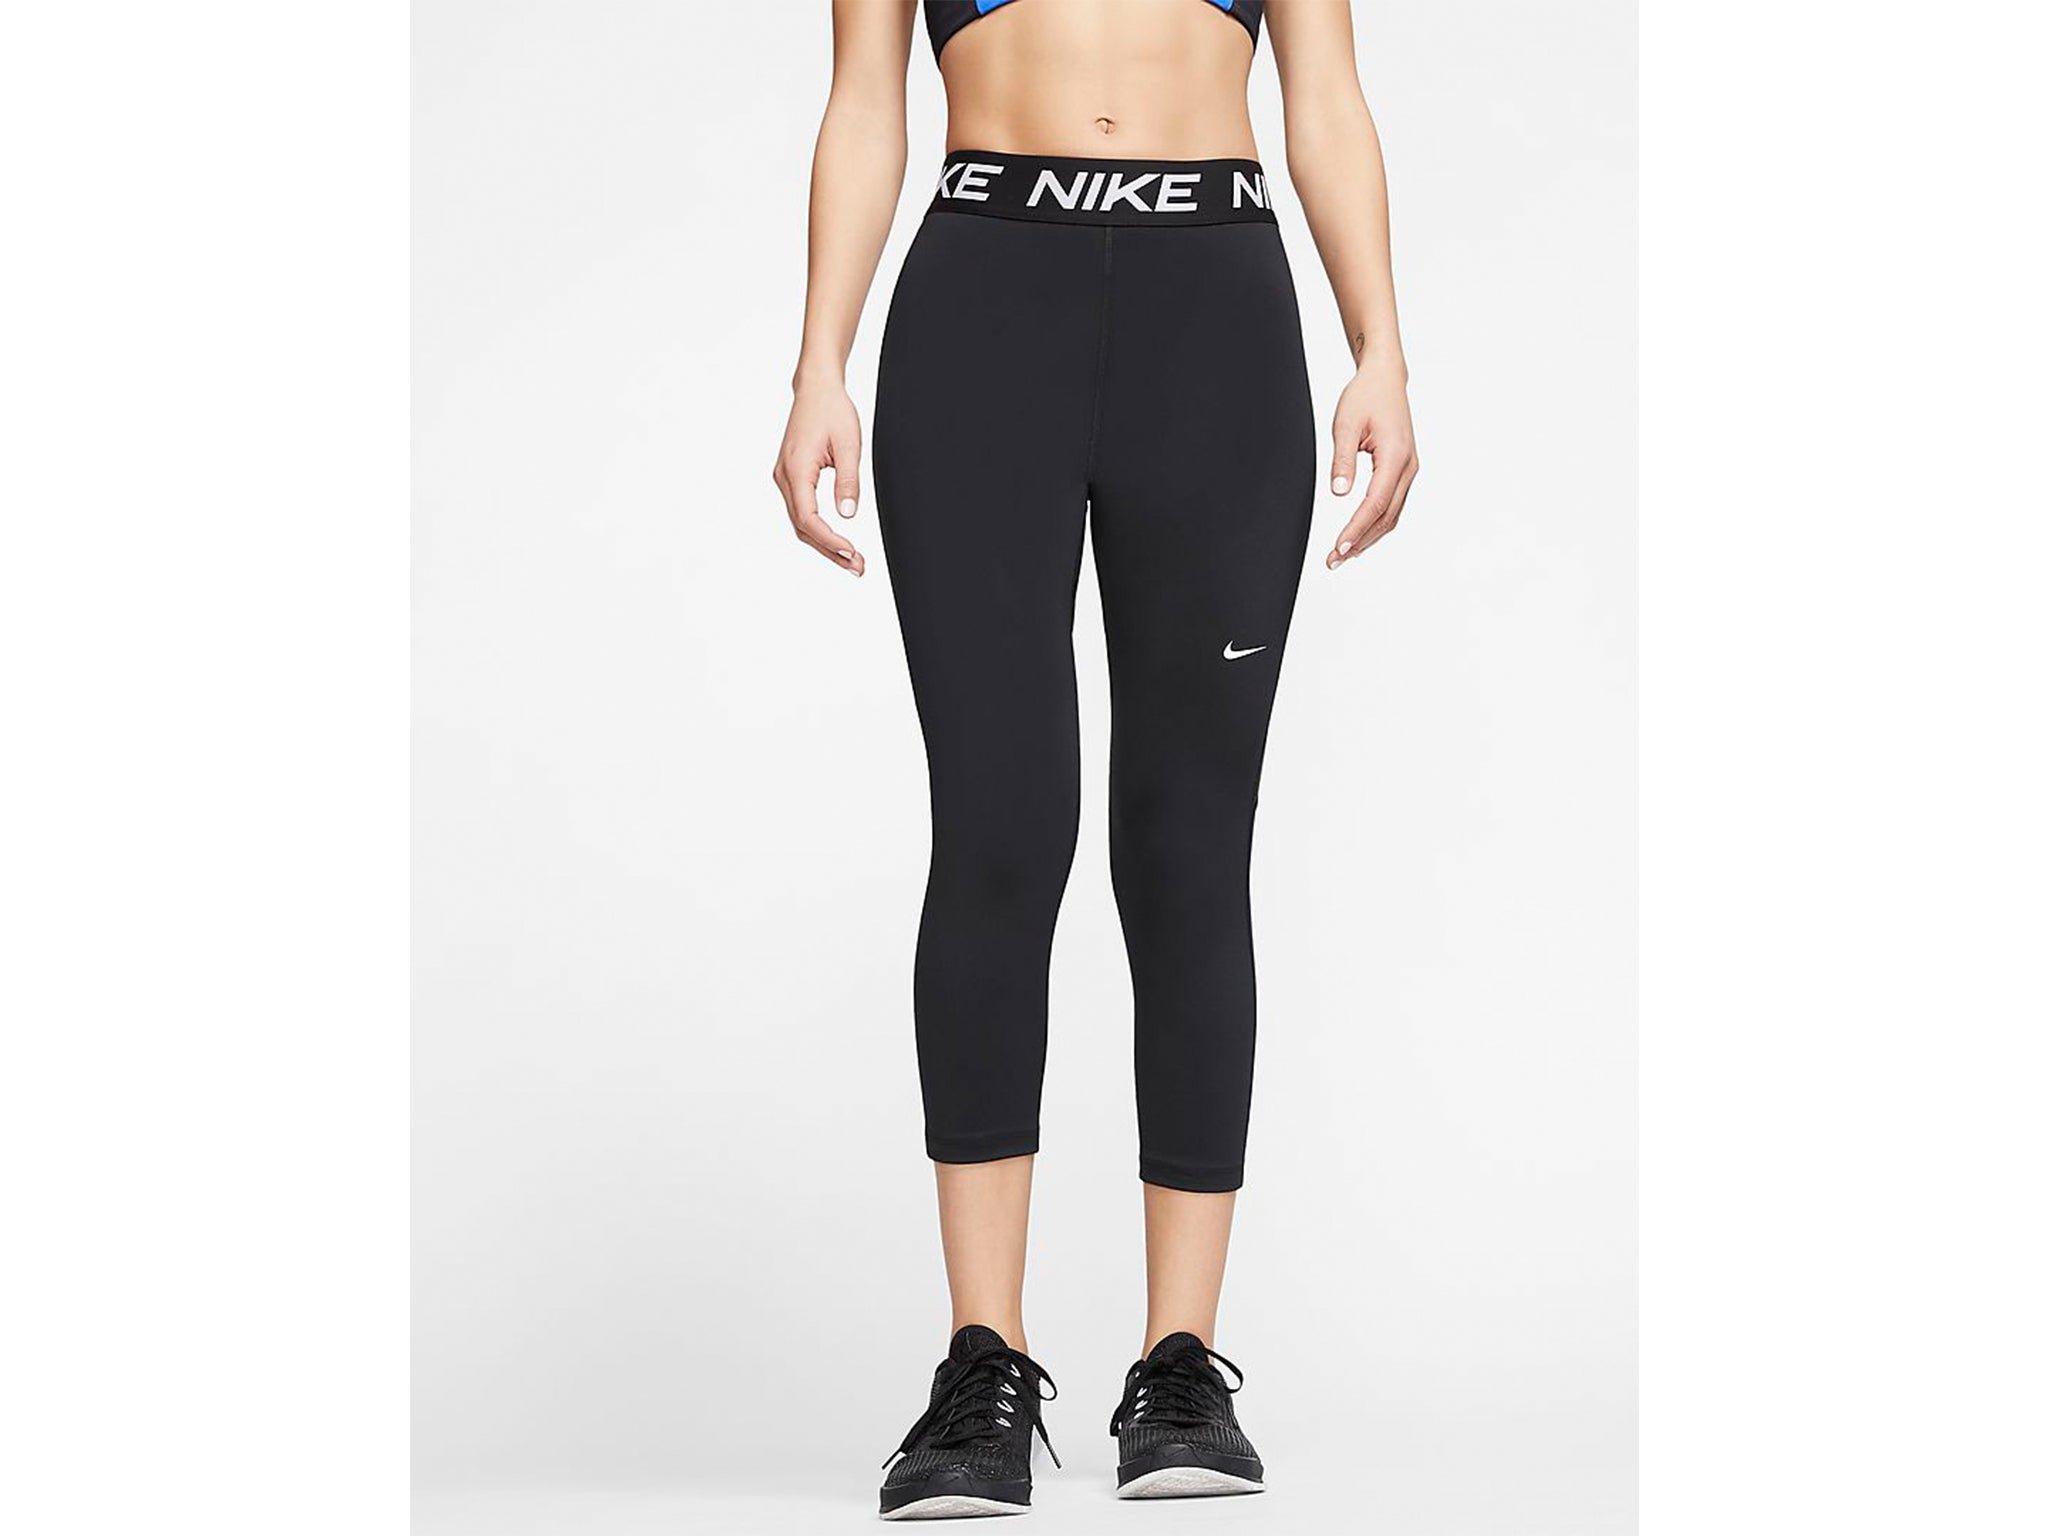 A pair of gym leggings will see you through whatever workout you choose when keeping active